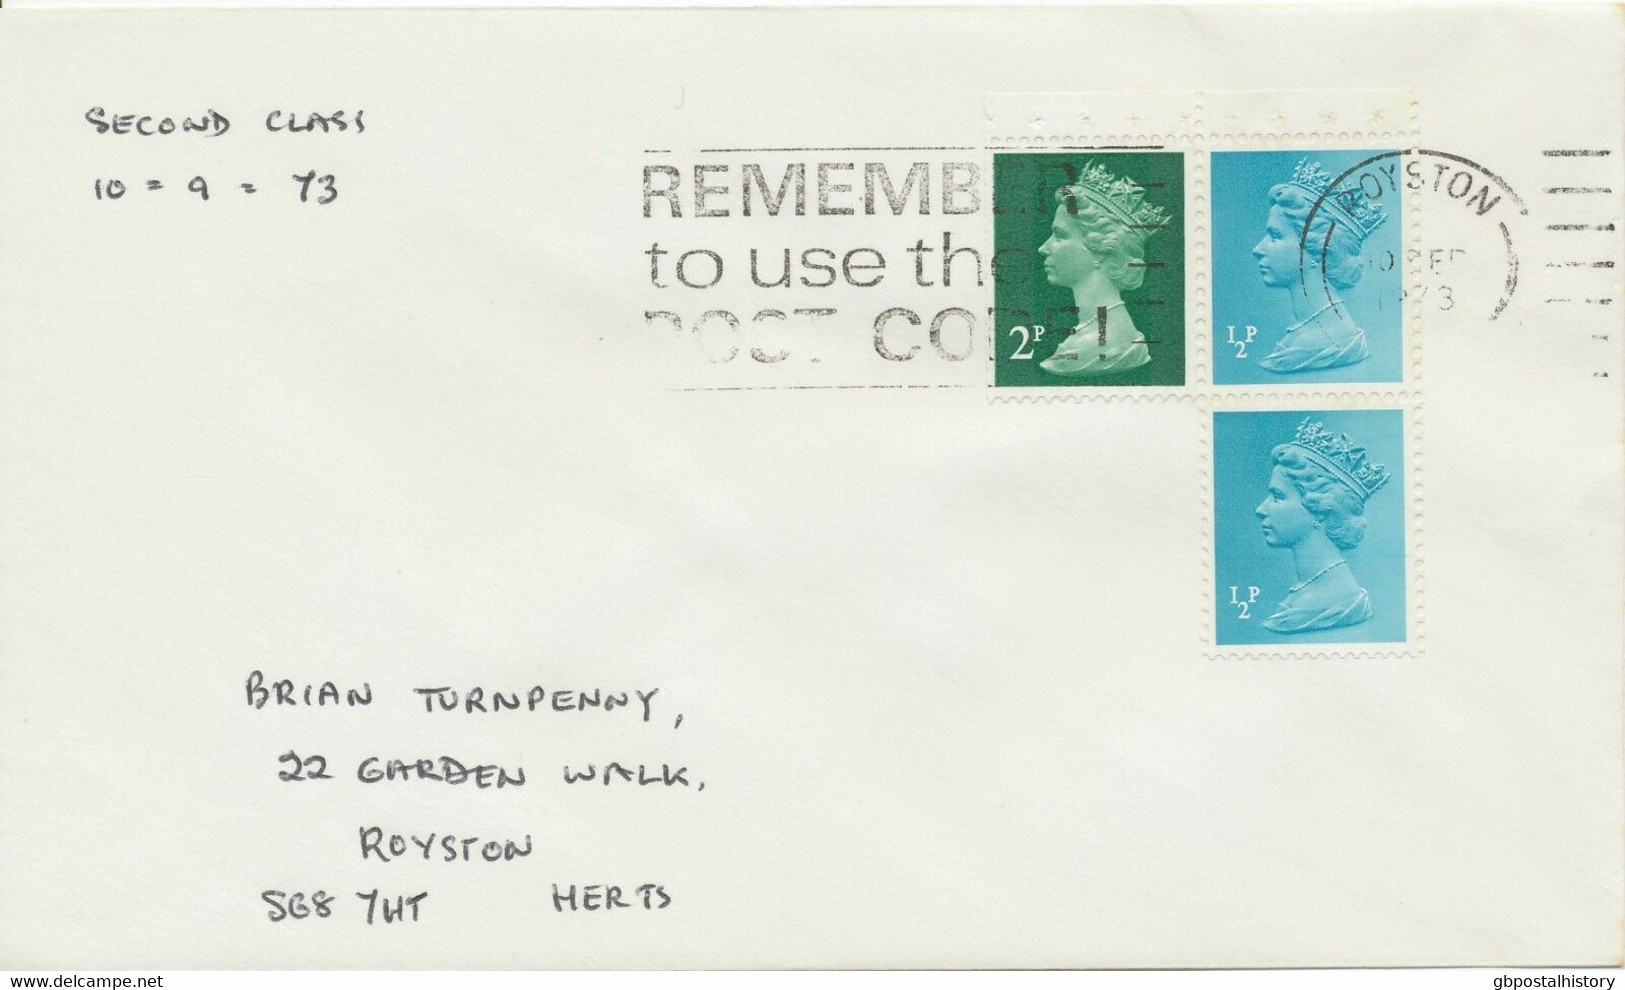 GB 10.9.1973 Machin 2P+1/2P+1/2P First Day Cover New Postage Rate 3P 2nd Class - Machins